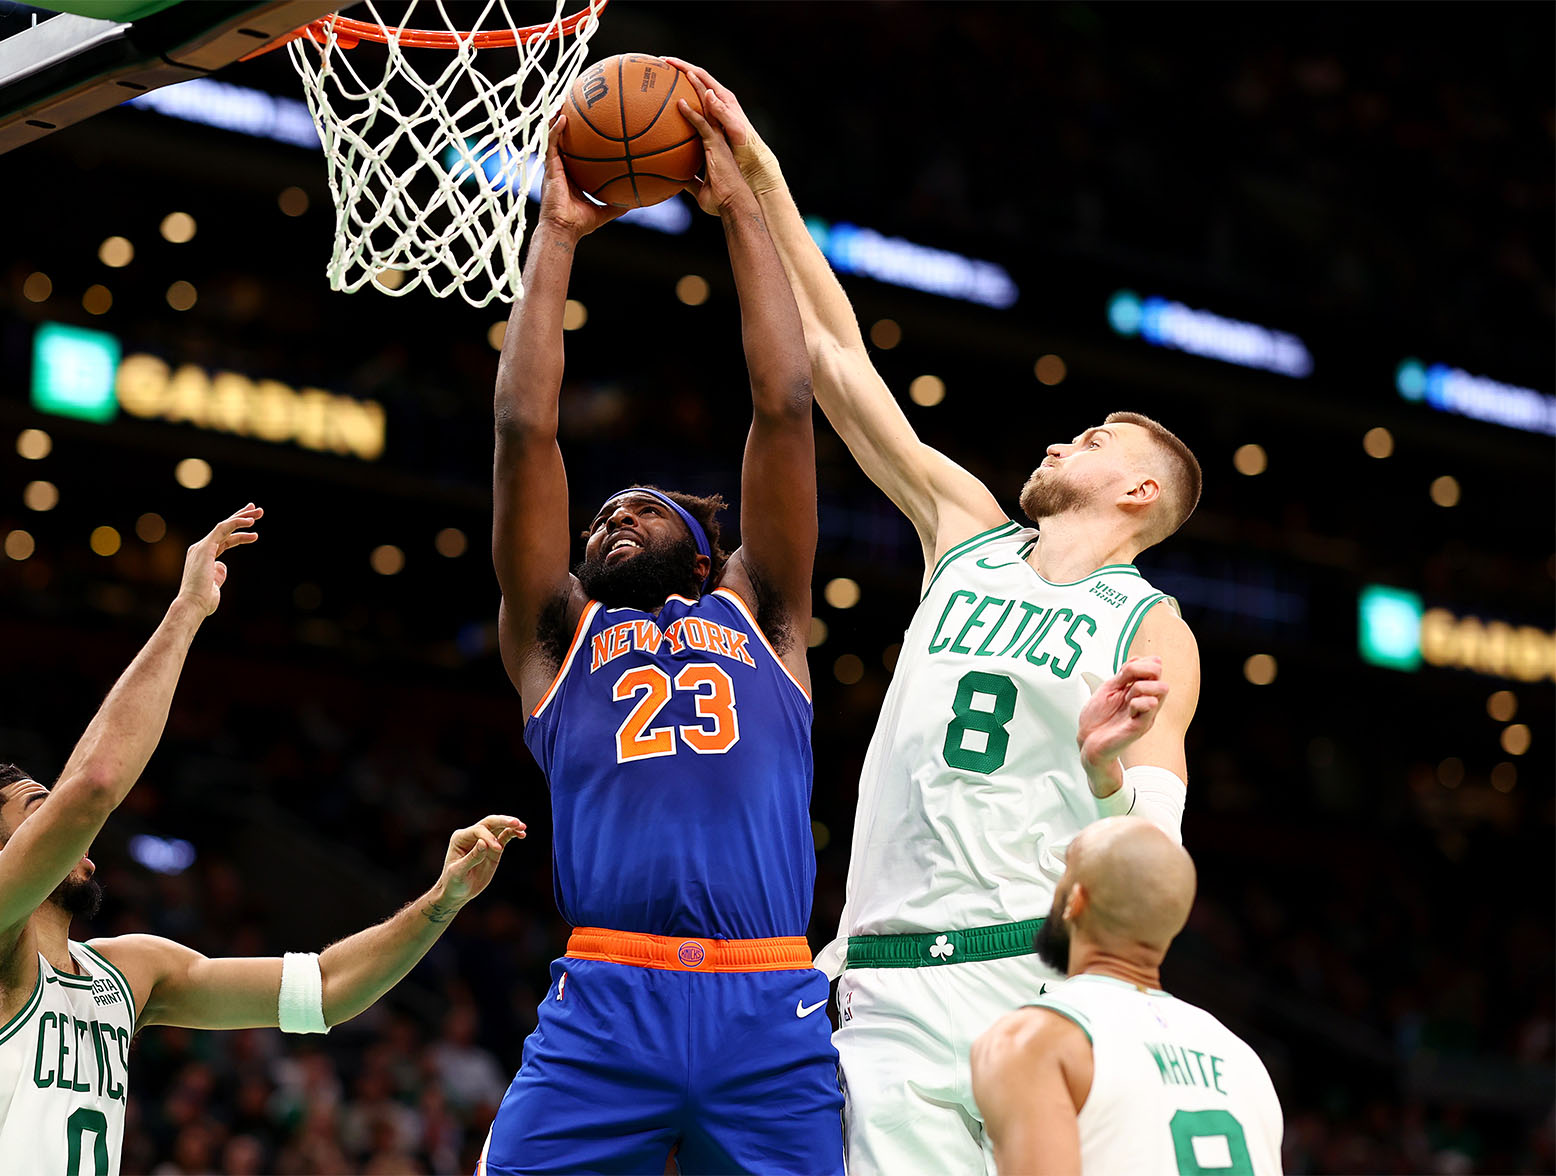 BOSTON, MASSACHUSETTS - OCTOBER 17: Kristaps Porzingis #8 of the Boston Celtics blocks a shot from Mitchell Robinson #23 of the New York Knicks during the second quarter of the preseason game at TD Garden on October 17, 2023 in Boston, Massachusetts. NOTE TO USER: User expressly acknowledges and agrees that, by downloading and or using this photograph, User is consenting to the terms and conditions of the Getty Images License Agreement. (Photo by Maddie Meyer/Getty Images)